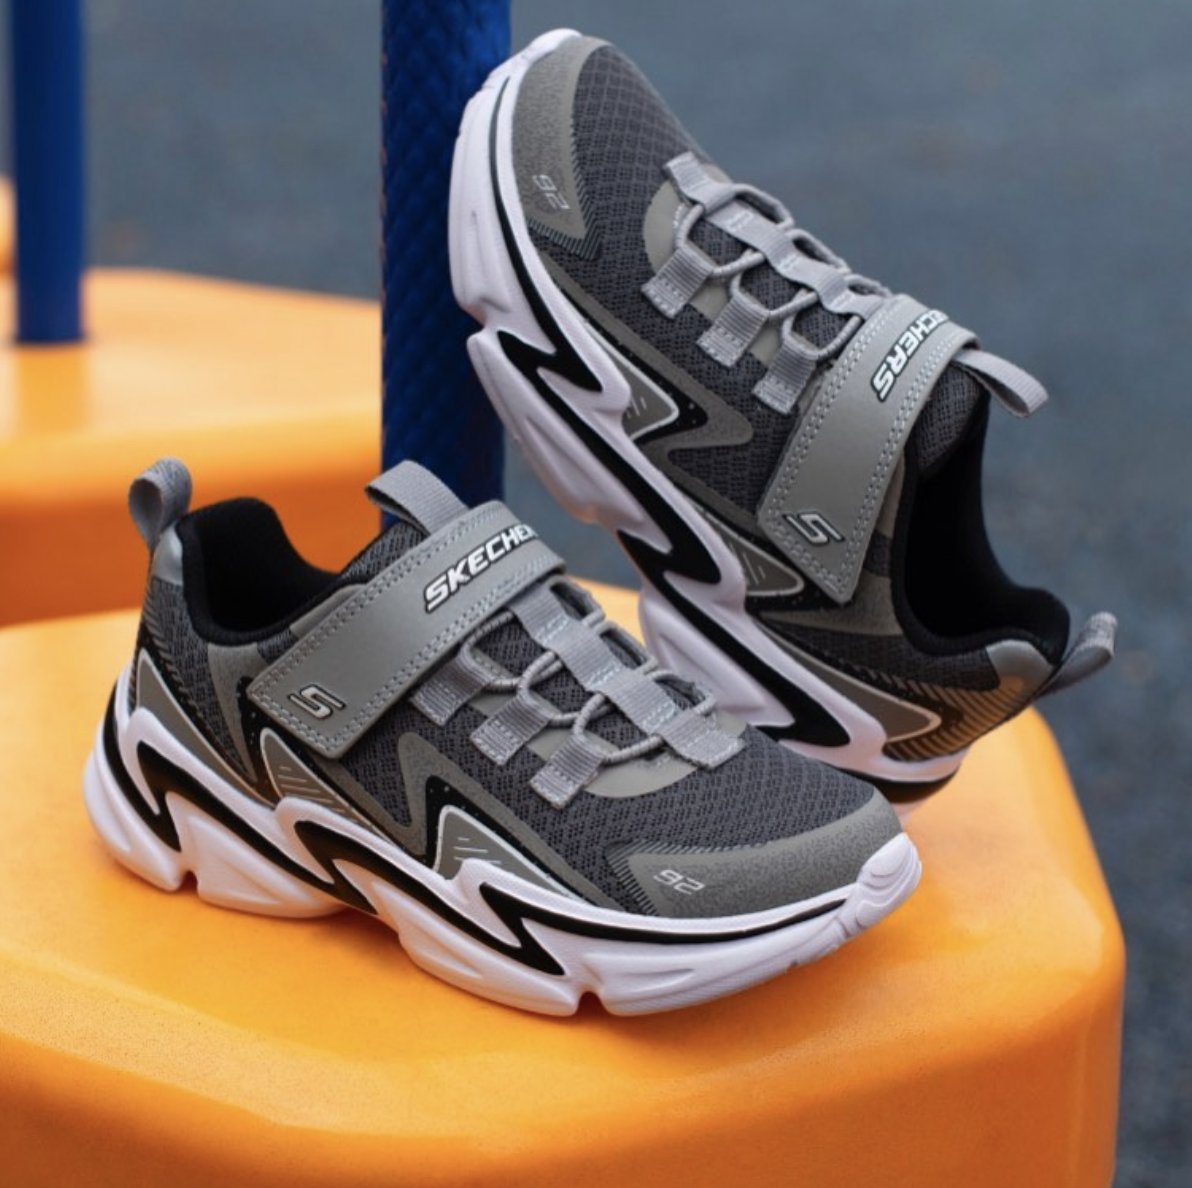 skechers shoes united states